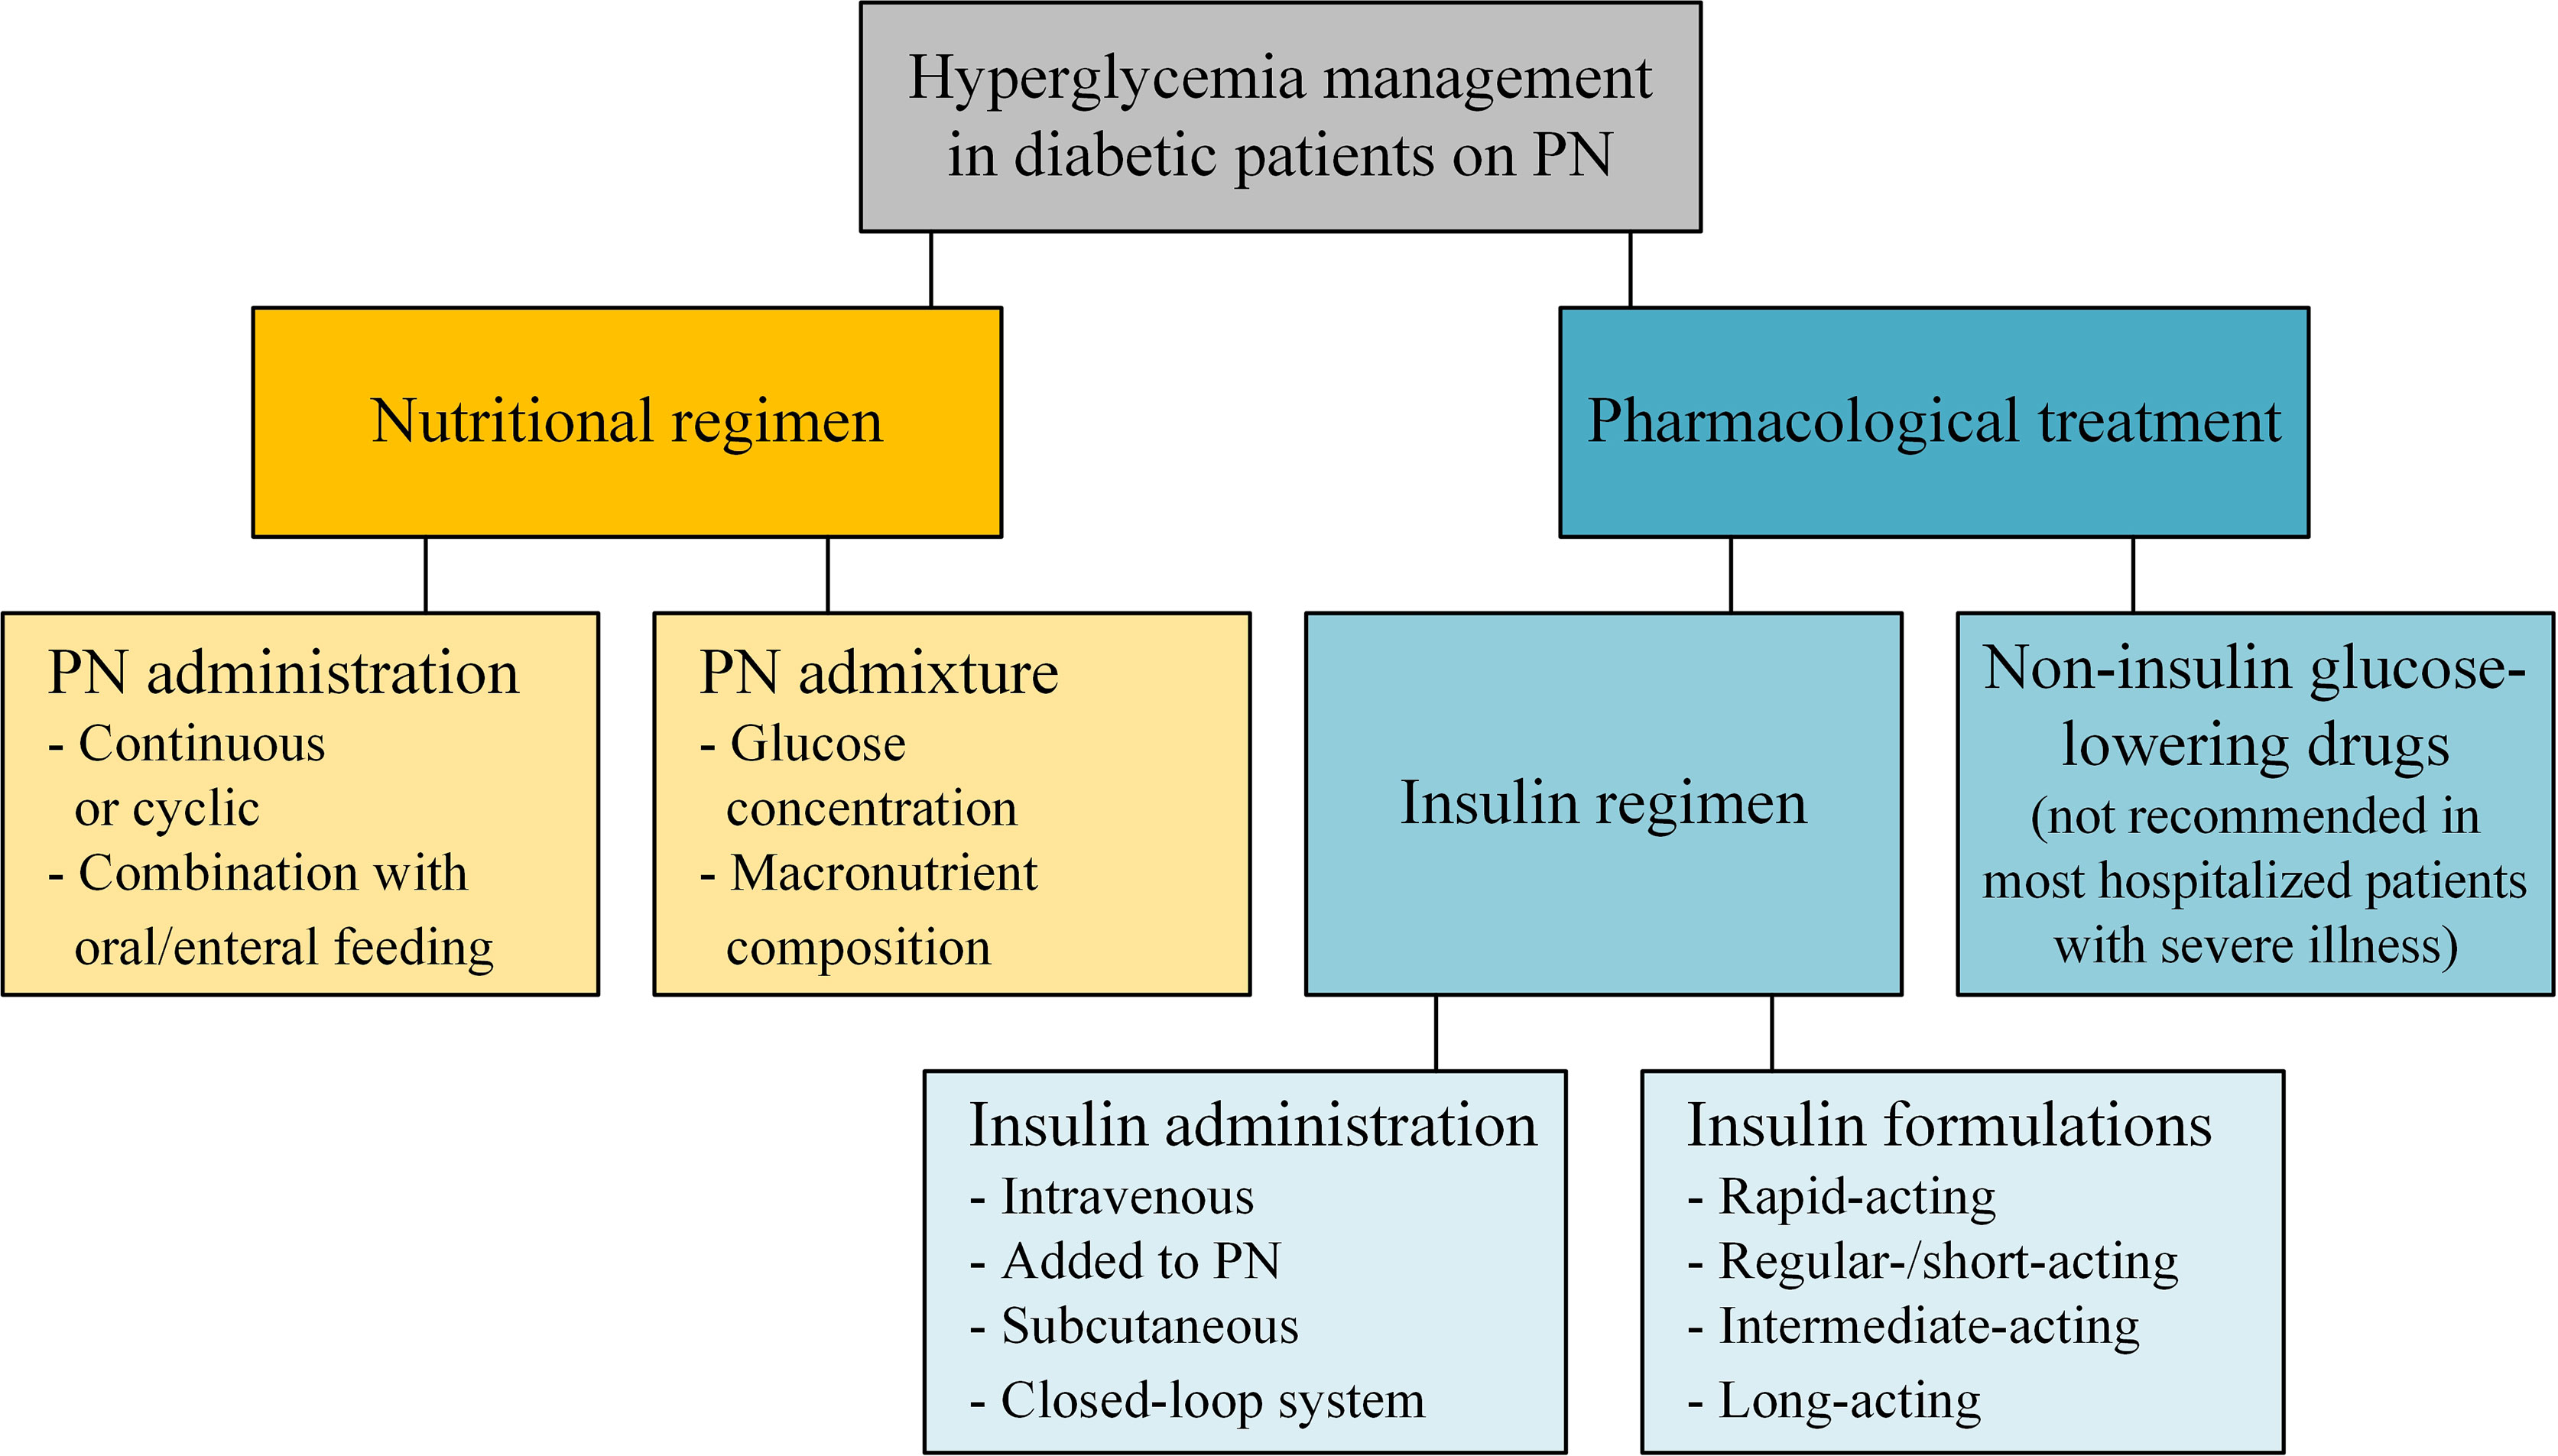 Managing hyperglycemia